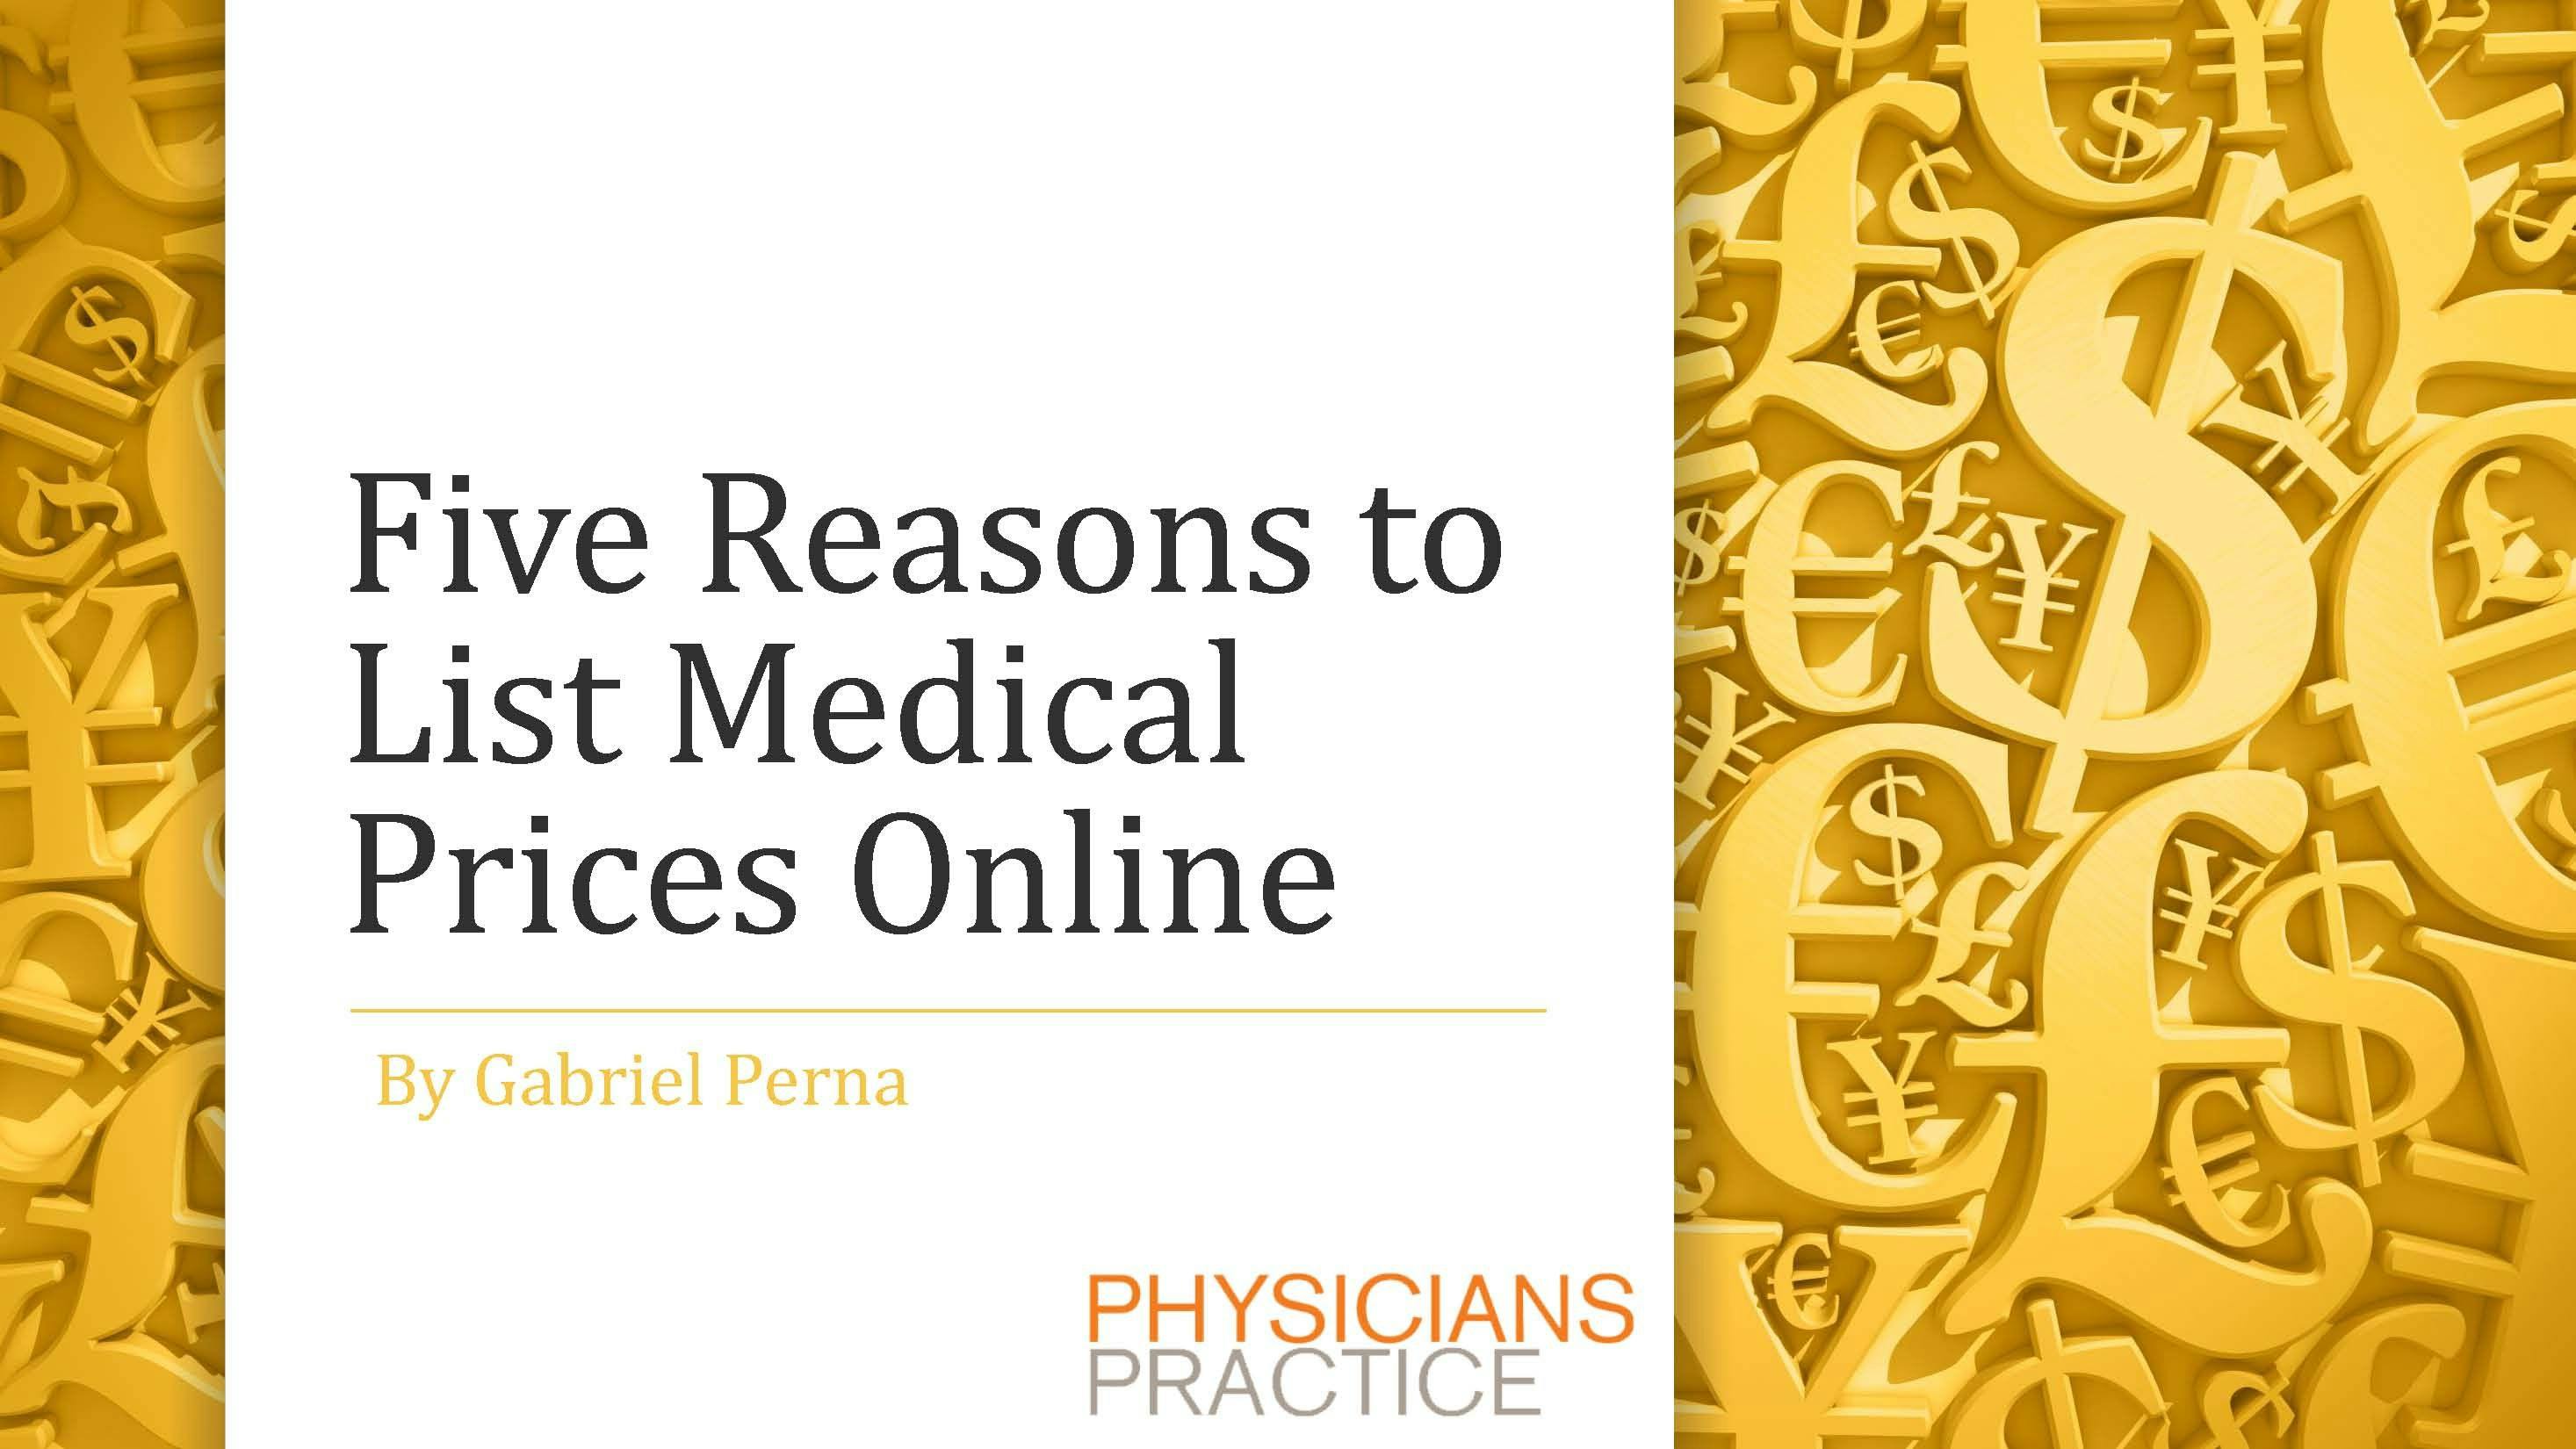 Five Reasons to List Medical Prices Online